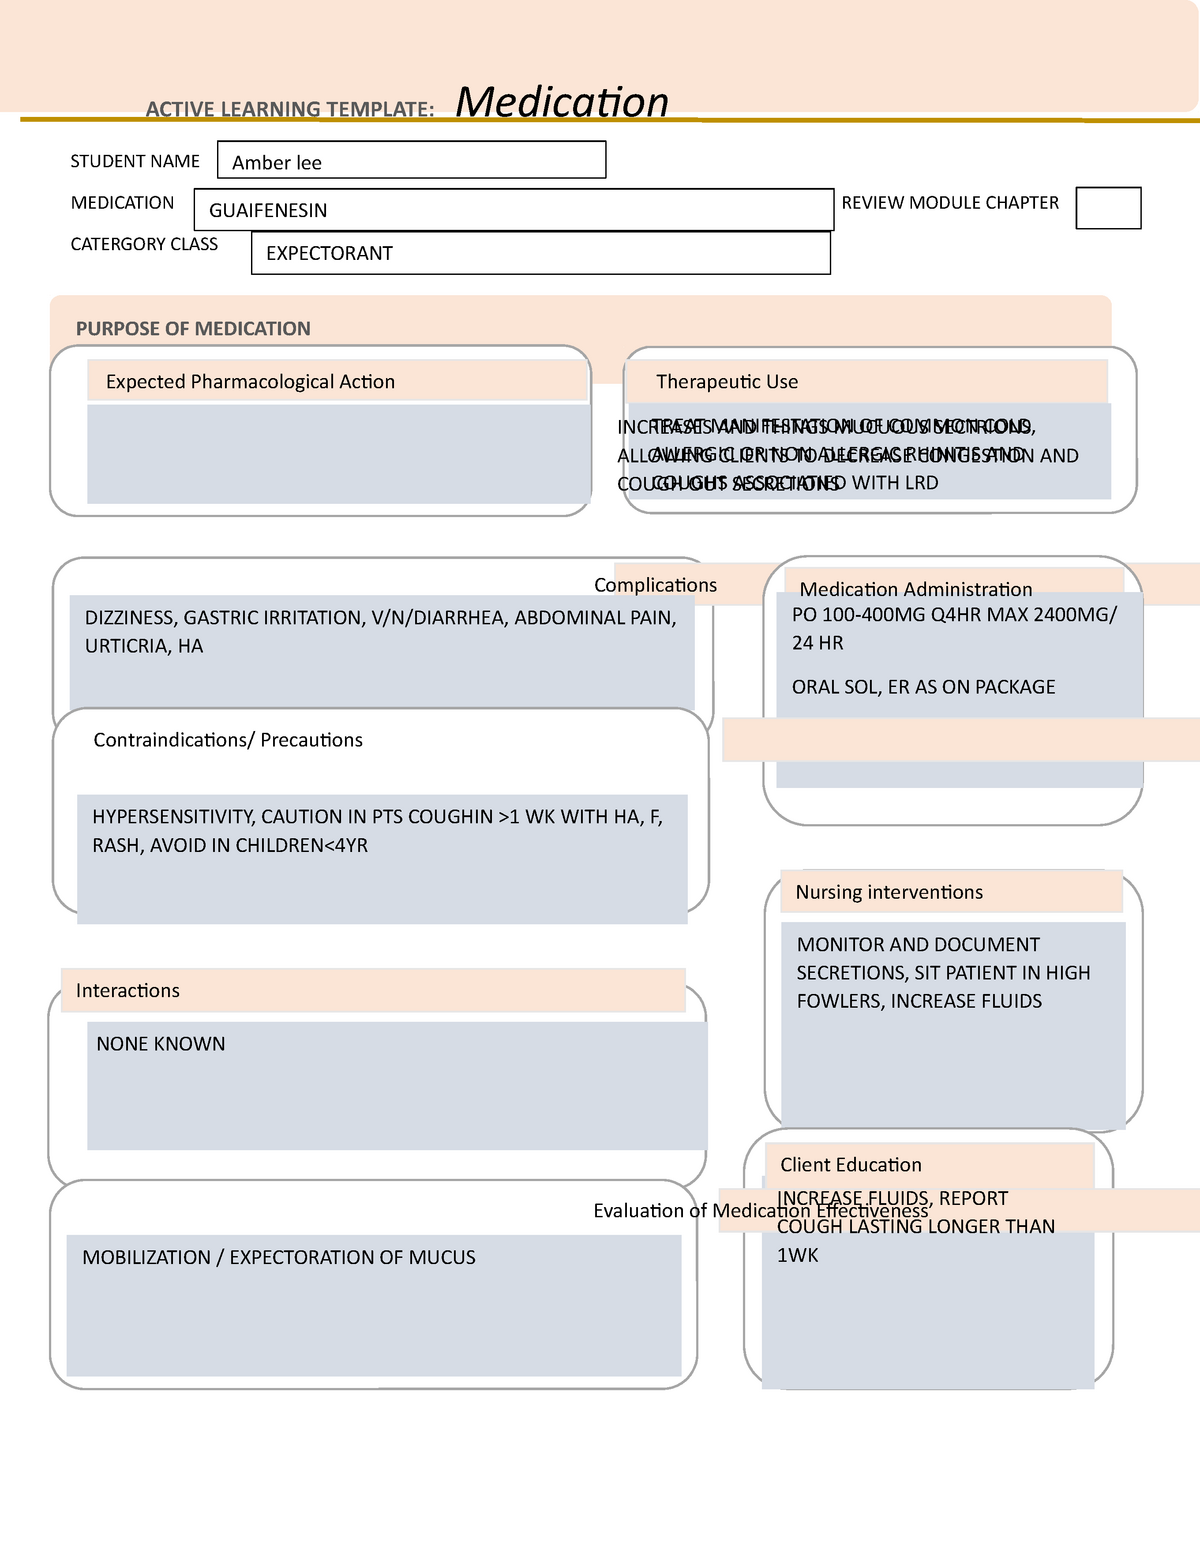 Guaifenesin Med Card ATI ACTIVE LEARNING TEMPLATE: Medication STUDENT